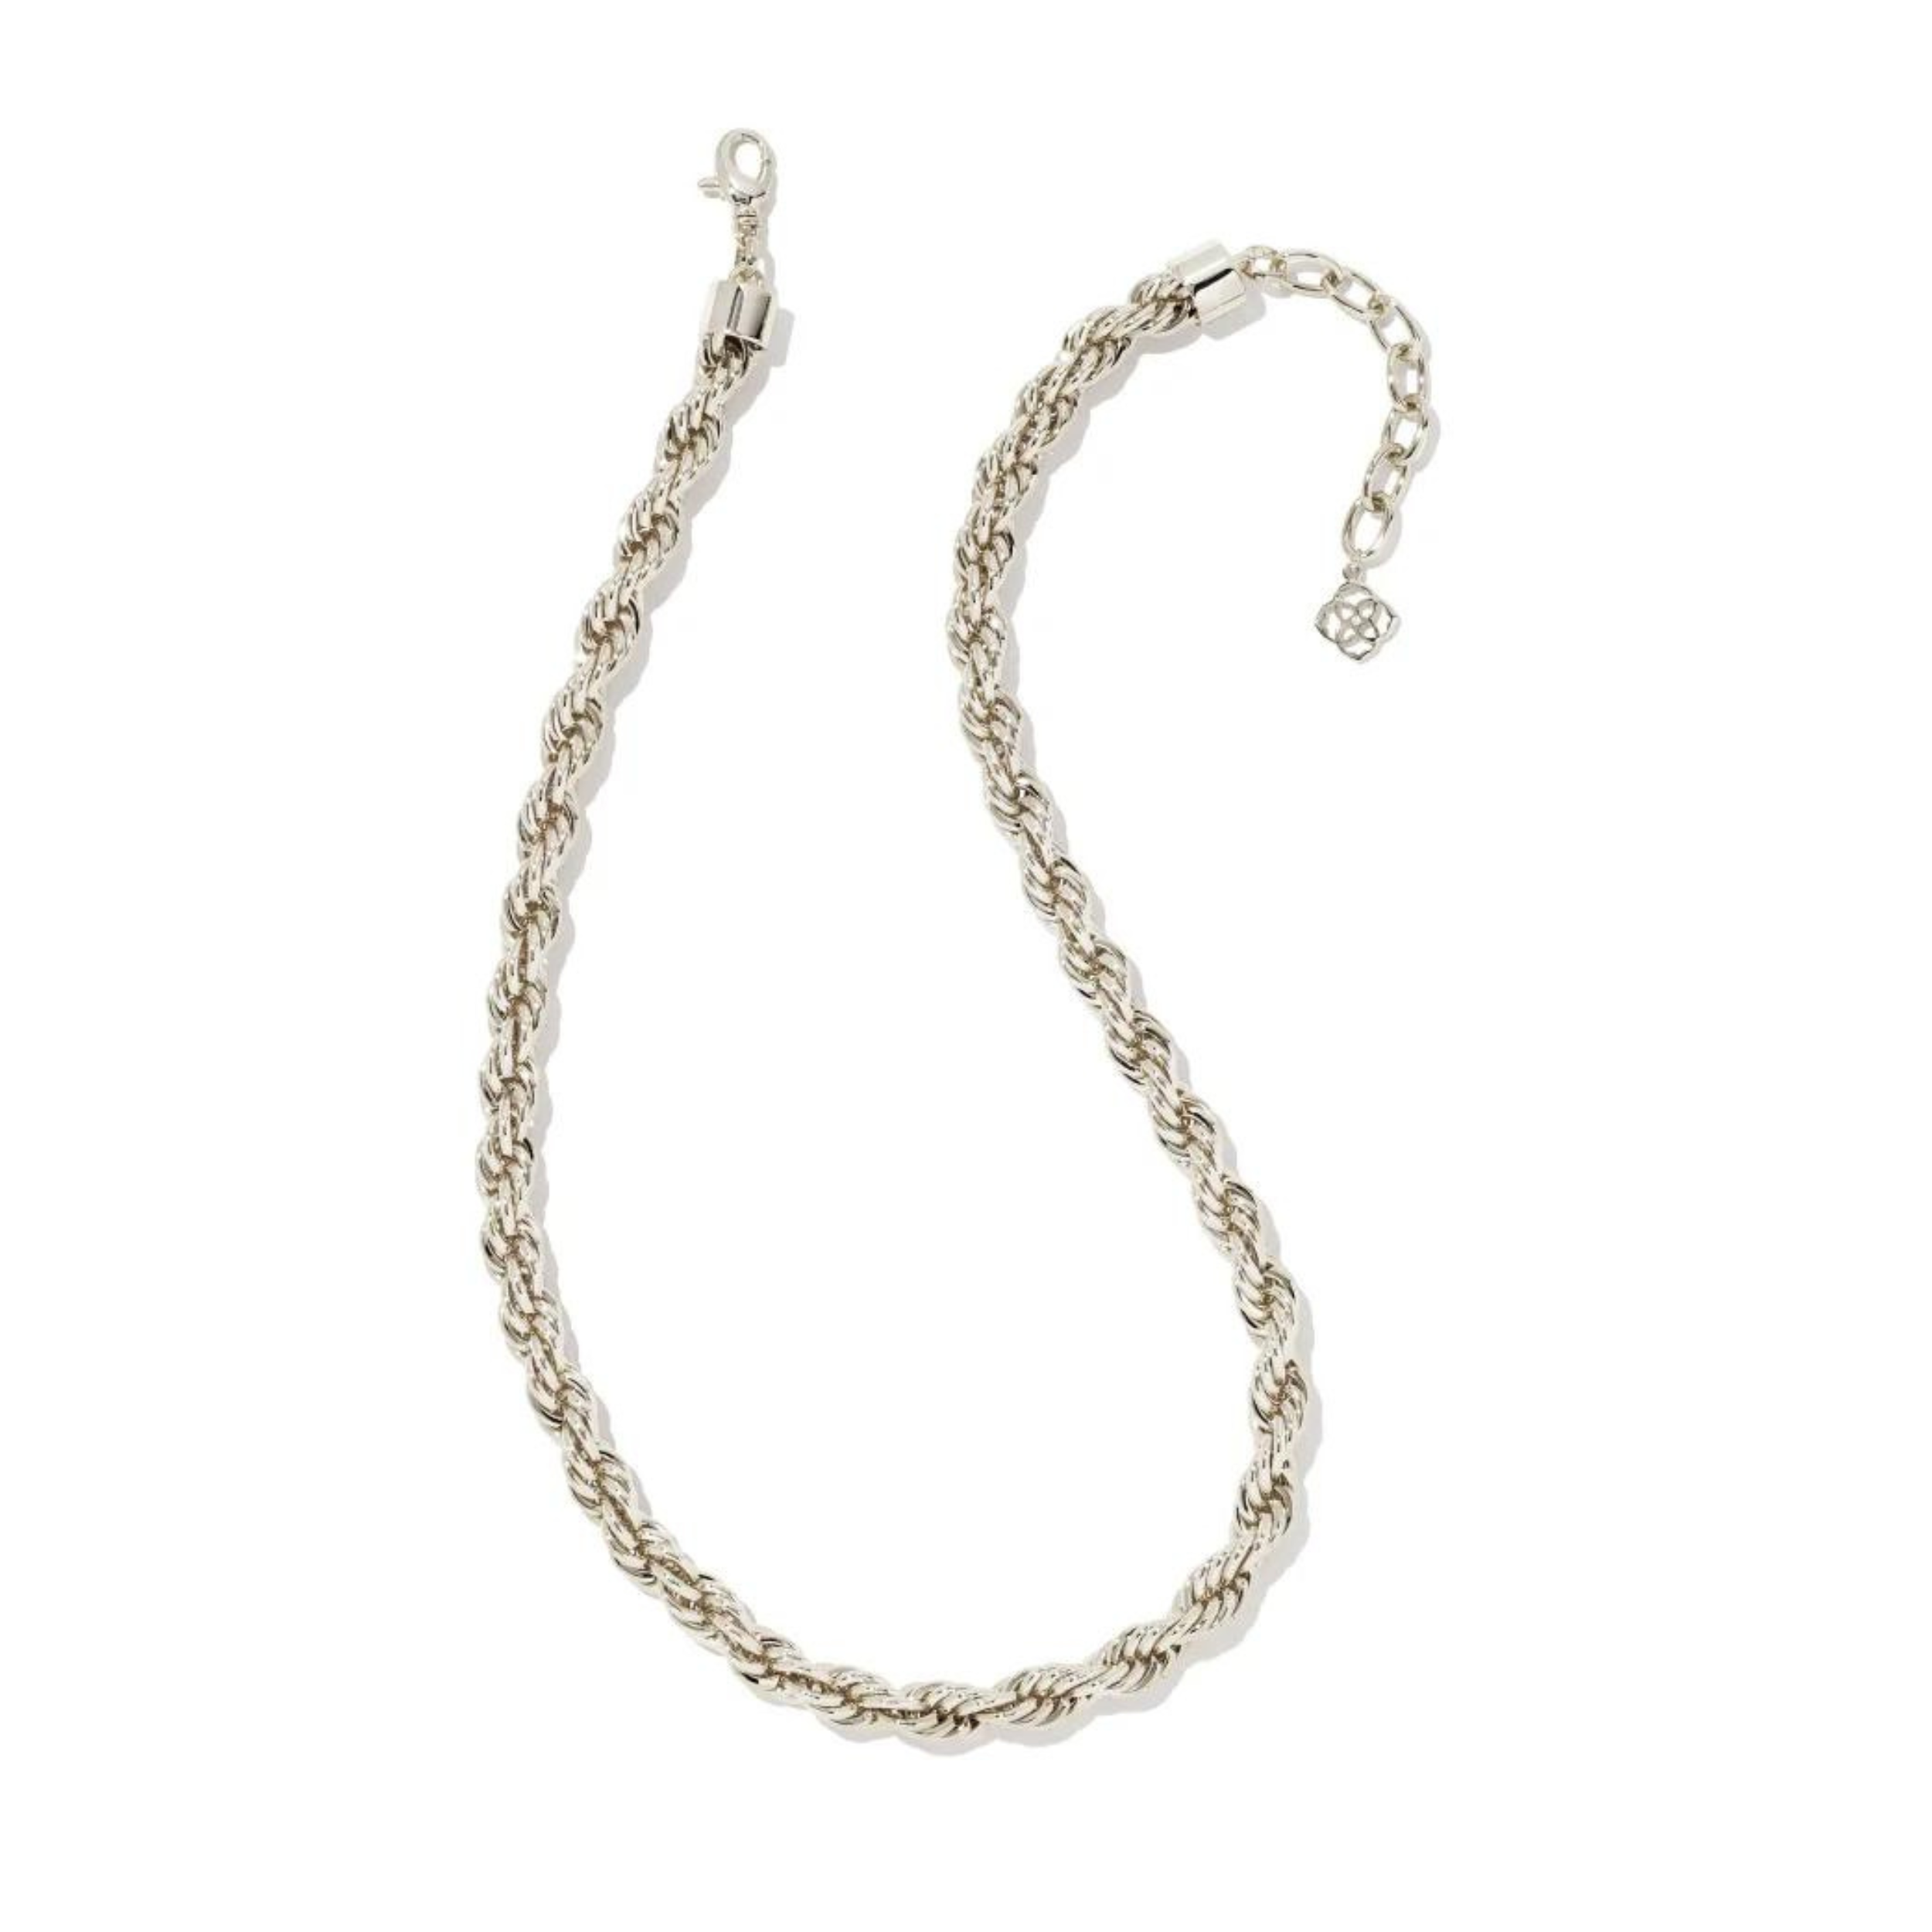 Kendra Scott | Cailey Chain Necklace in Silver - Giddy Up Glamour Boutique